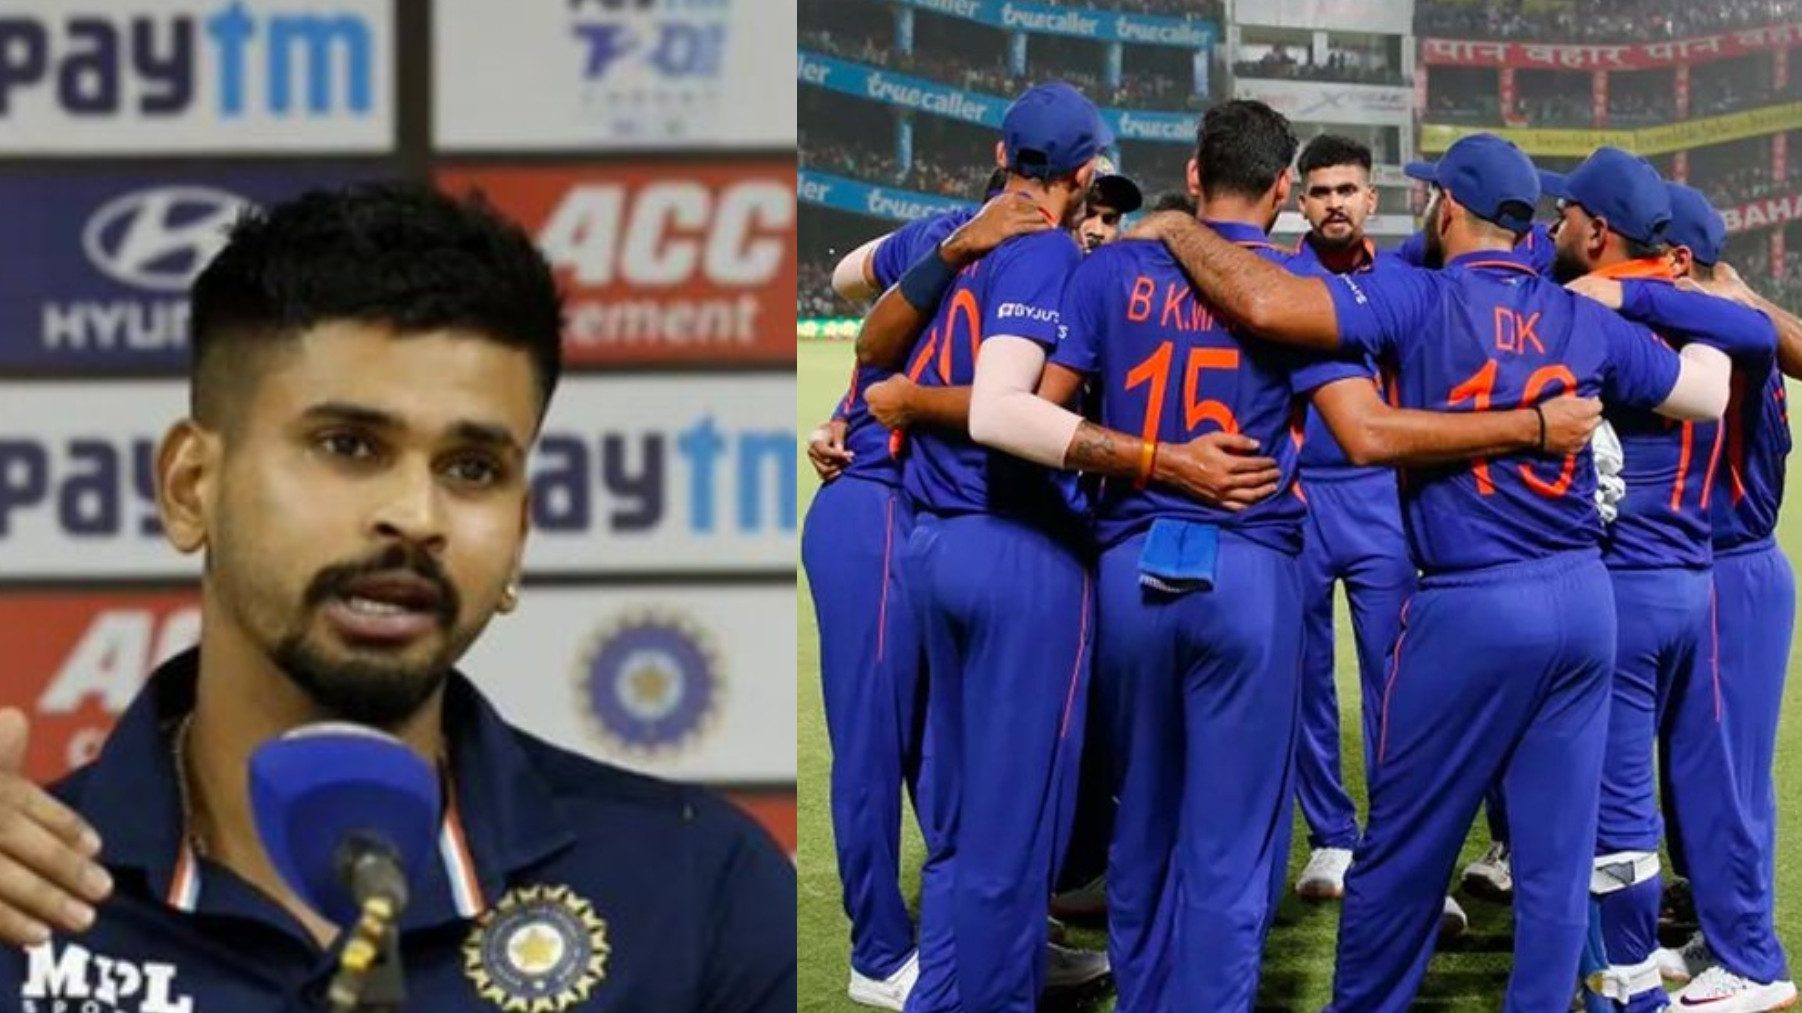 IND v SA 2022: Our main aim is obviously the World Cup- Shreyas Iyer says India planning with T20 WC in mind